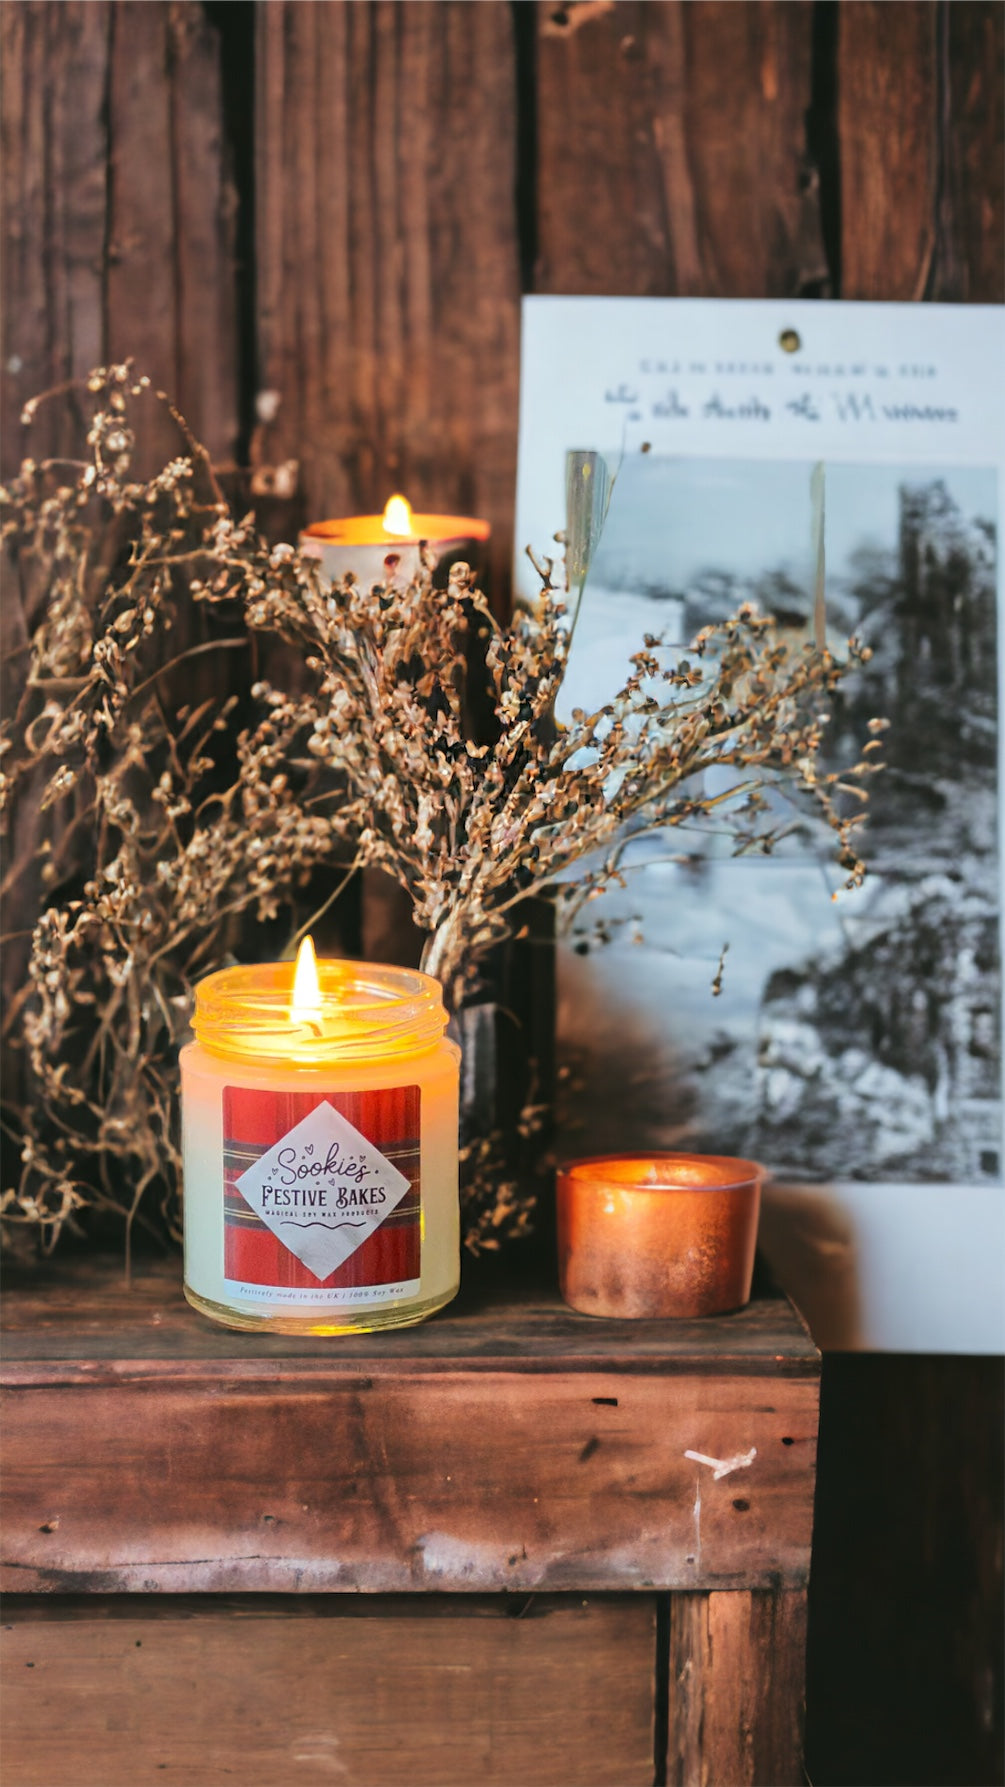 Gilmore Girls Sookie's Festive Bakes Candle